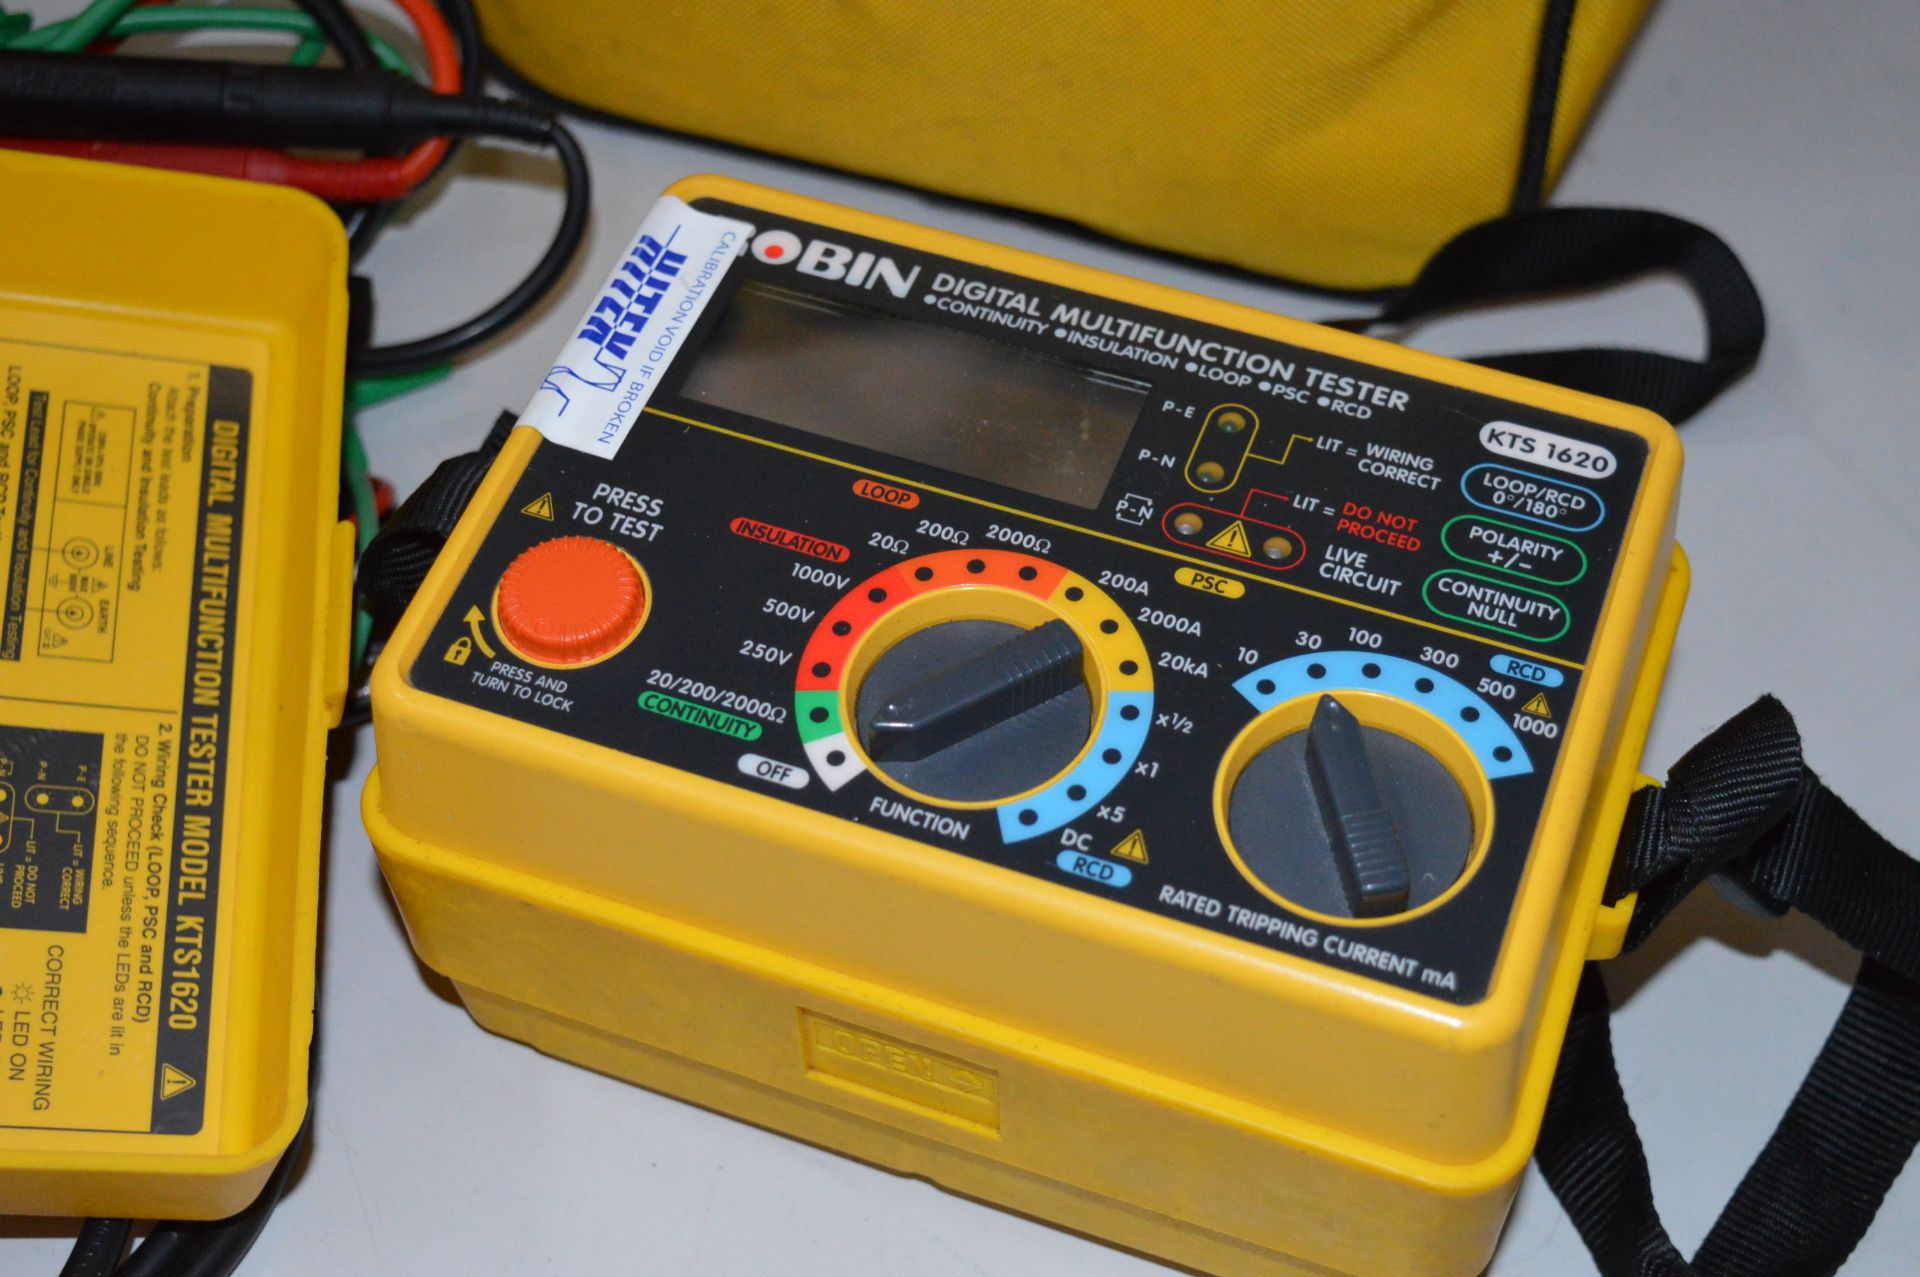 1 x Robin 5 in 1 Multi Function Tester - Model KTS 1620 - Includes Case and Cables - For The Testing